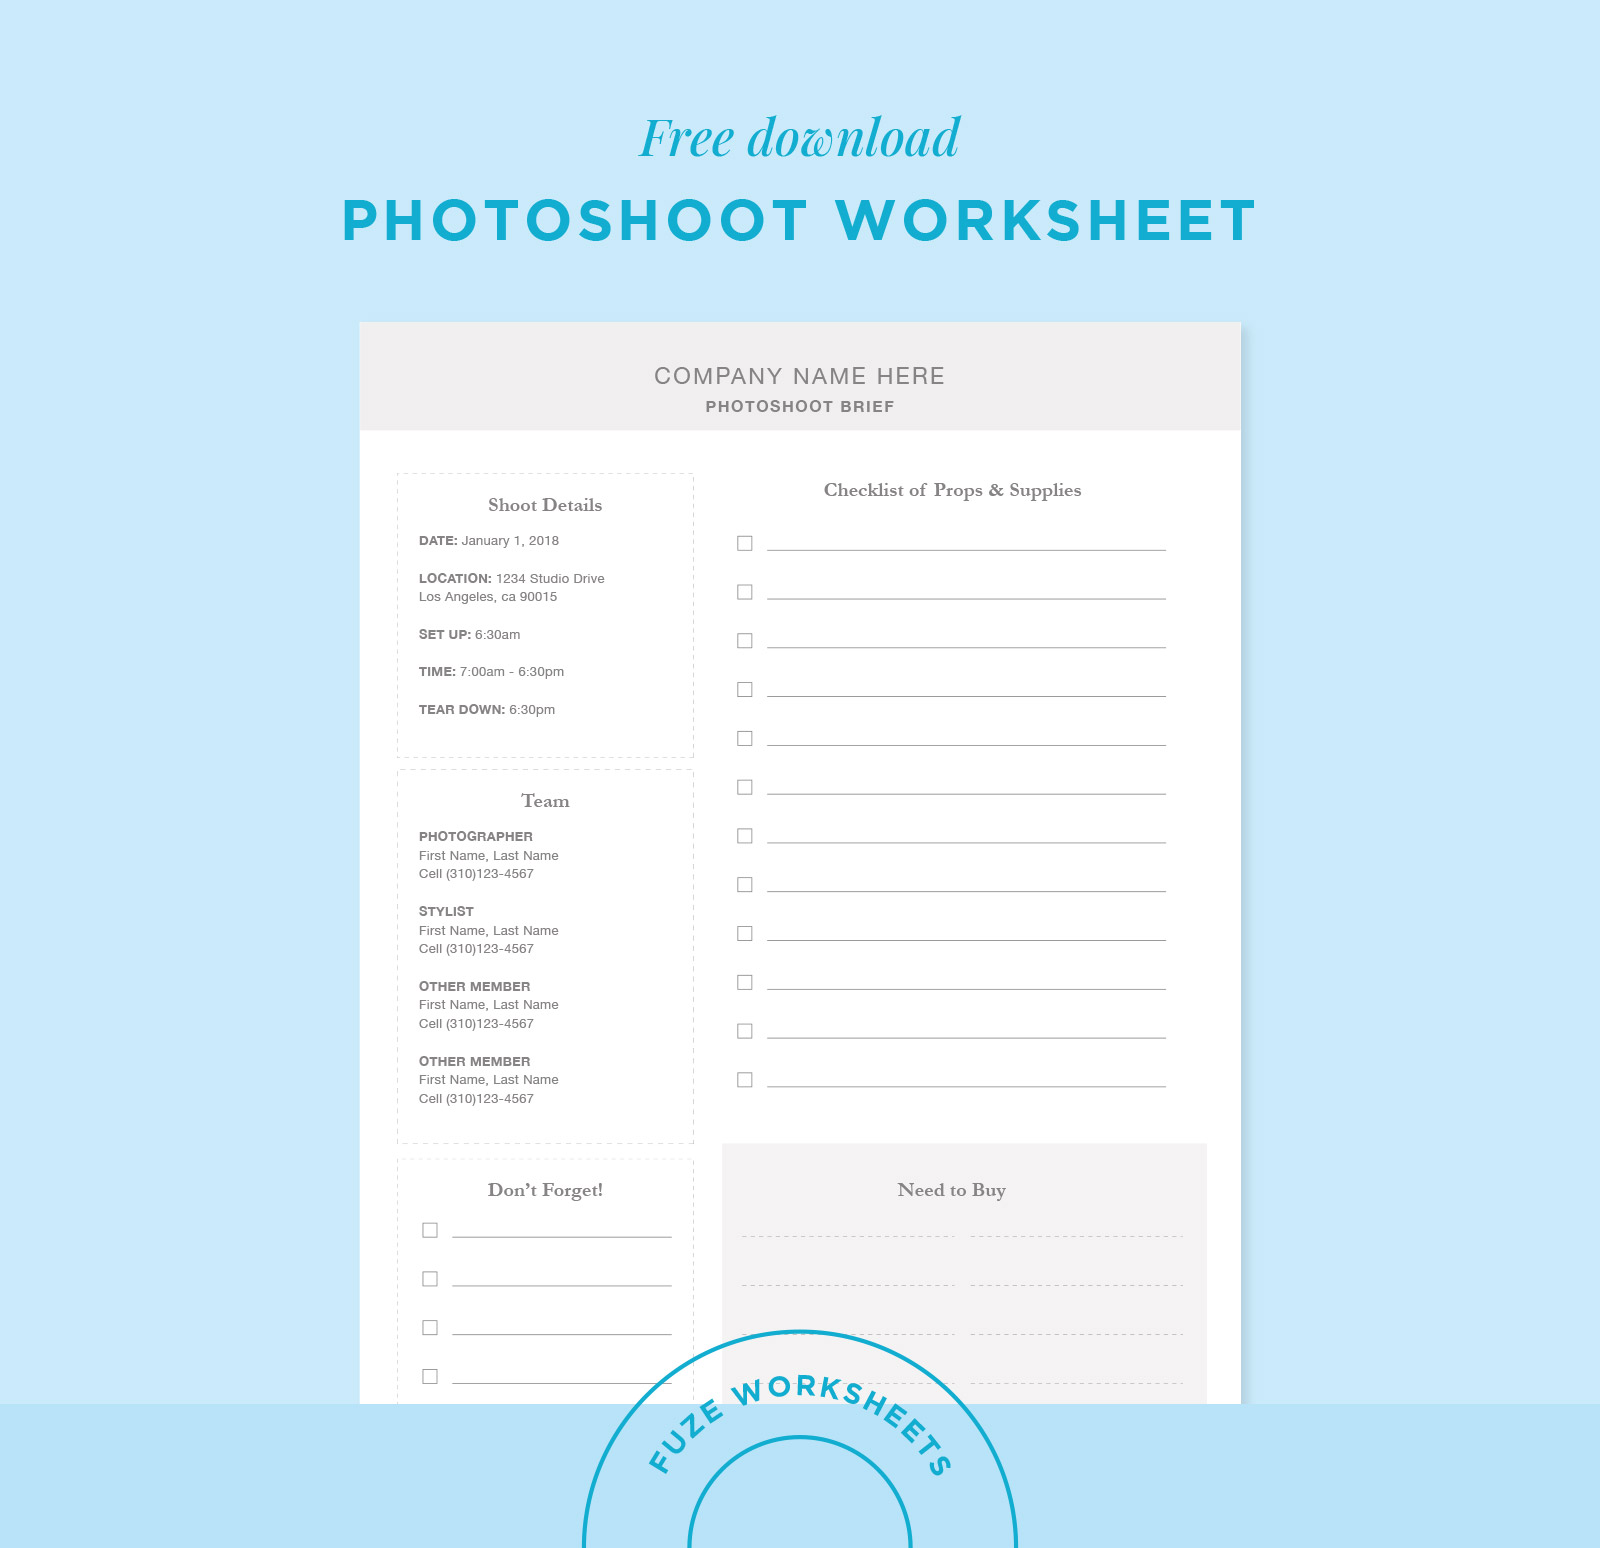 Free Photoshoot Brief Template for Small Business Owners